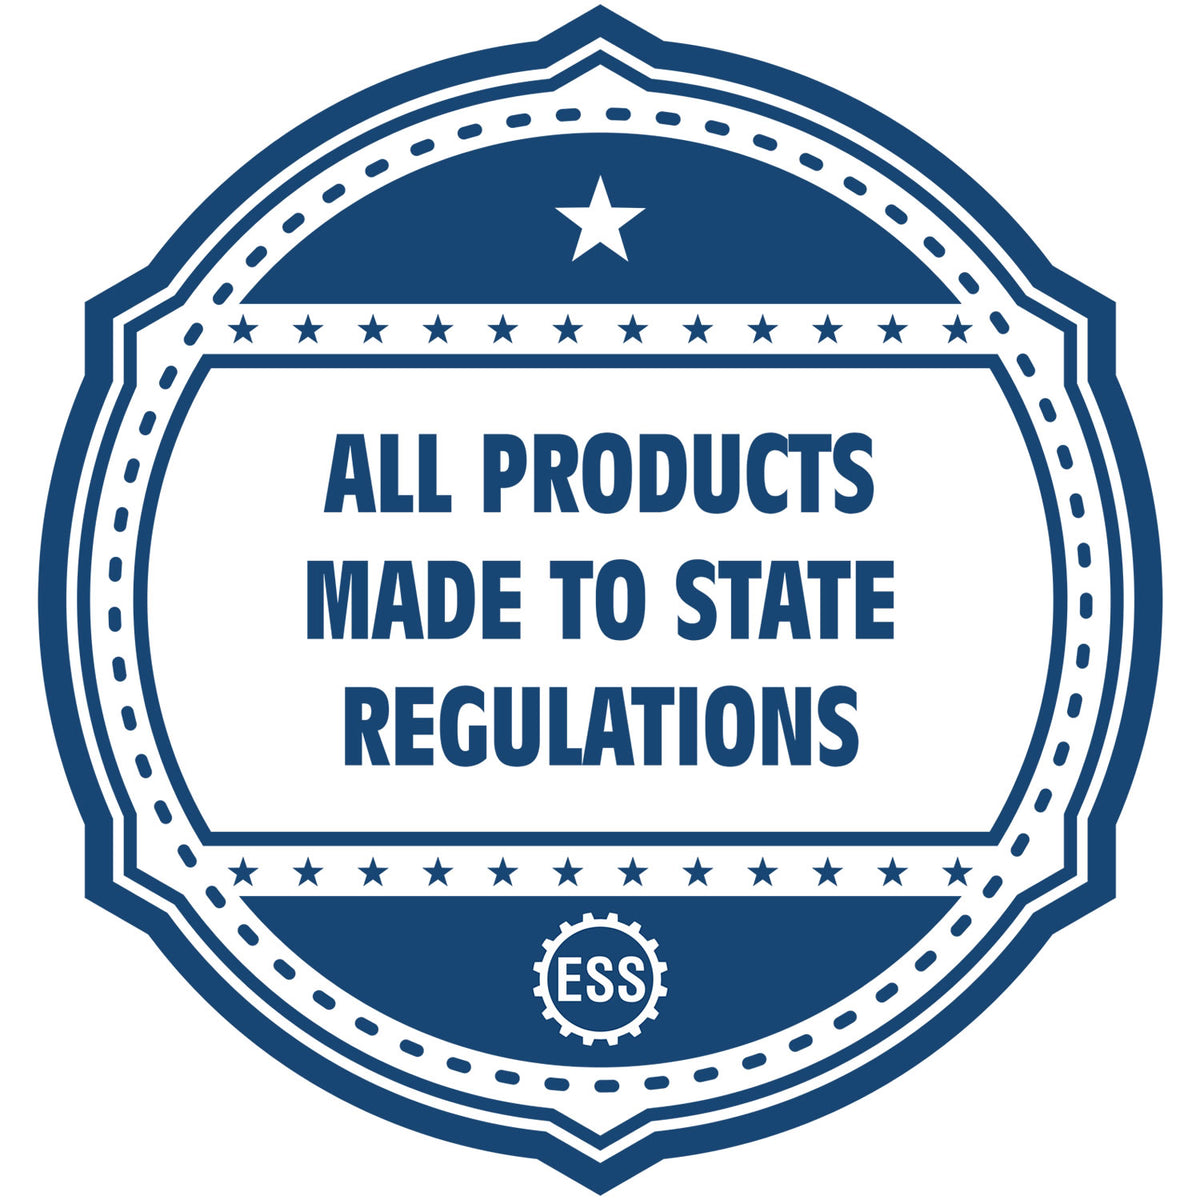 An icon or badge element for the Handheld Iowa Land Surveyor Seal showing that this product is made in compliance with state regulations.